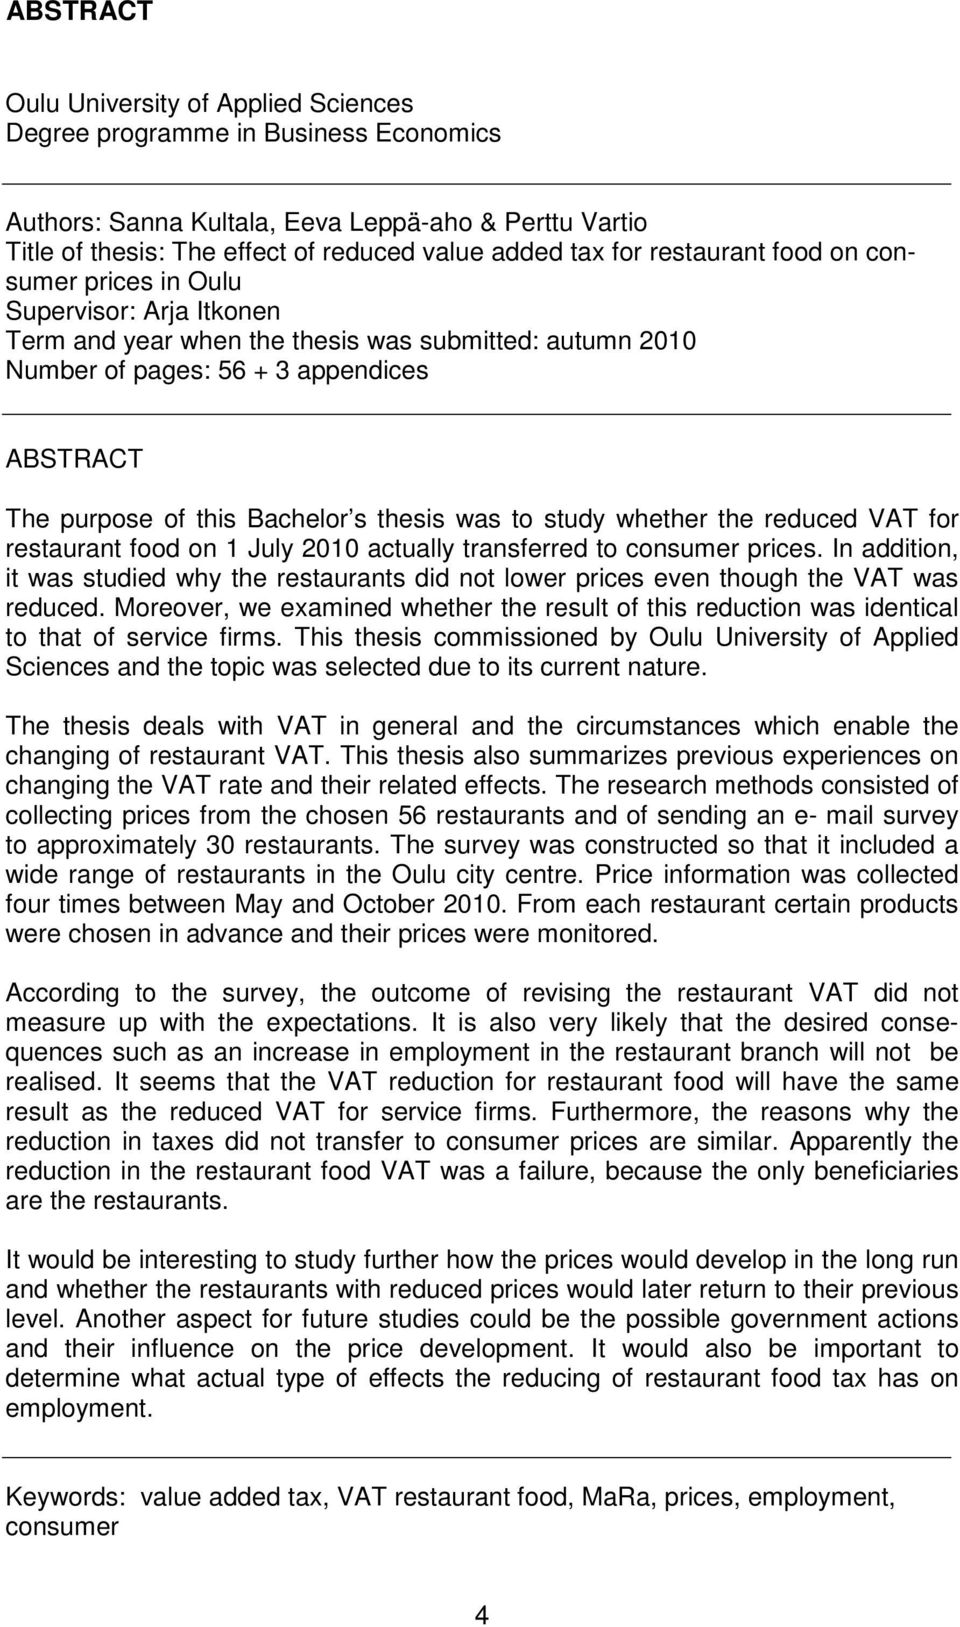 thesis was to study whether the reduced VAT for restaurant food on 1 July 2010 actually transferred to consumer prices.